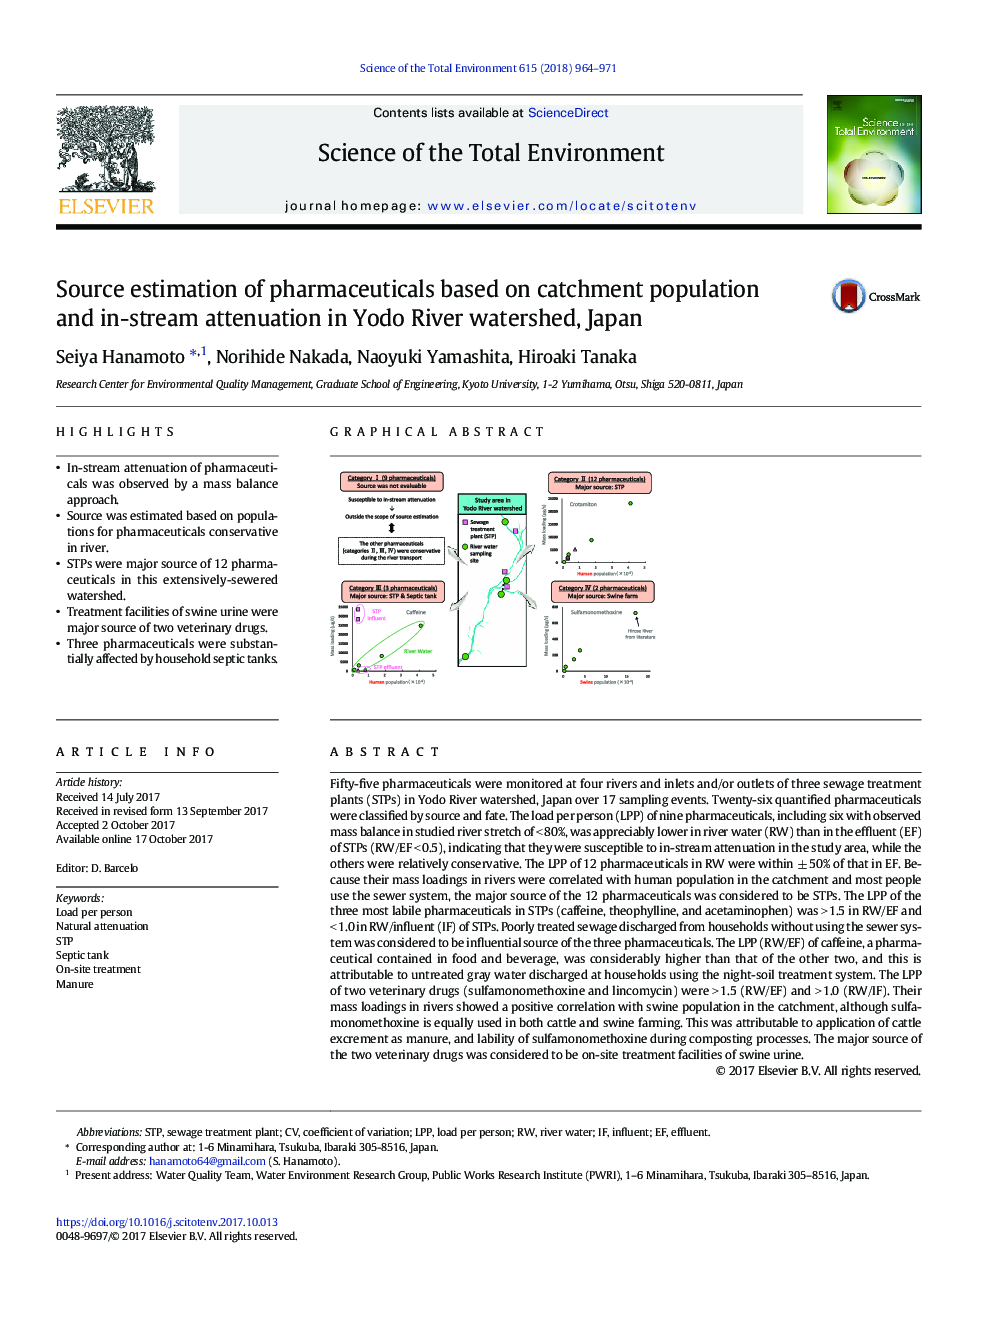 Source estimation of pharmaceuticals based on catchment population and in-stream attenuation in Yodo River watershed, Japan